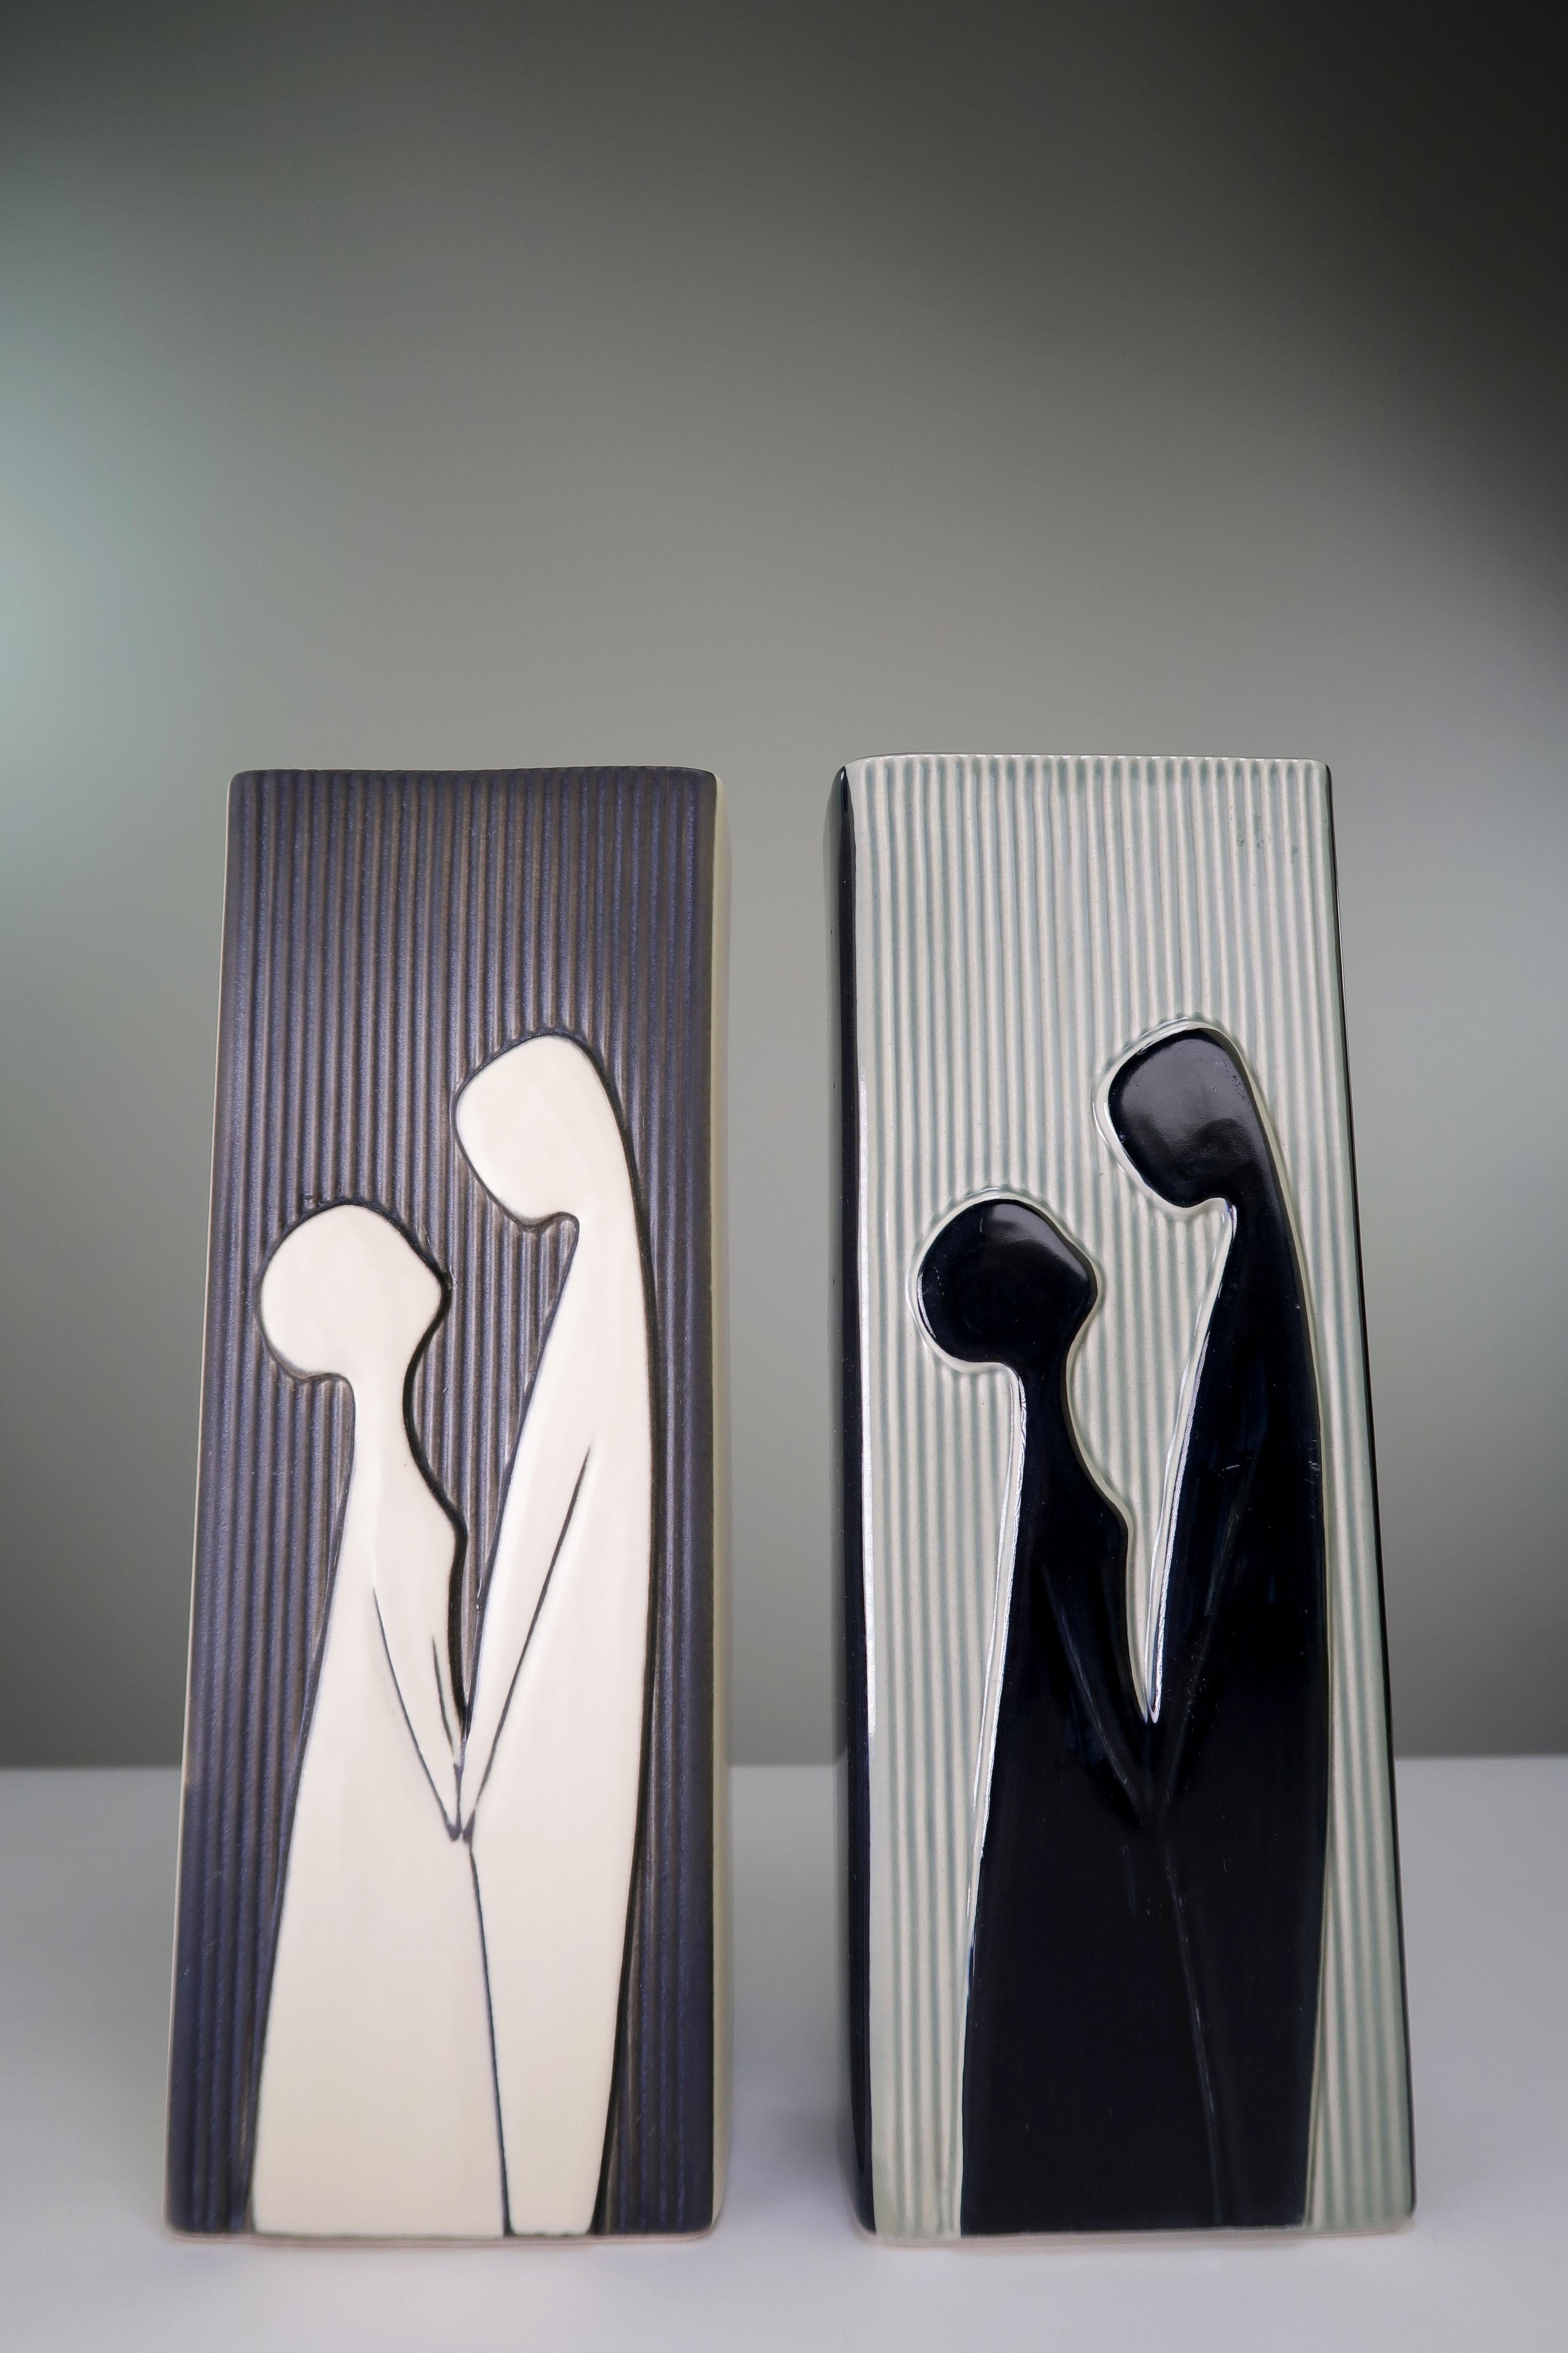 Two graphically stunning rectangular shaped vases by acclaimed designer Svend Aage Holm Sørensen from the series 